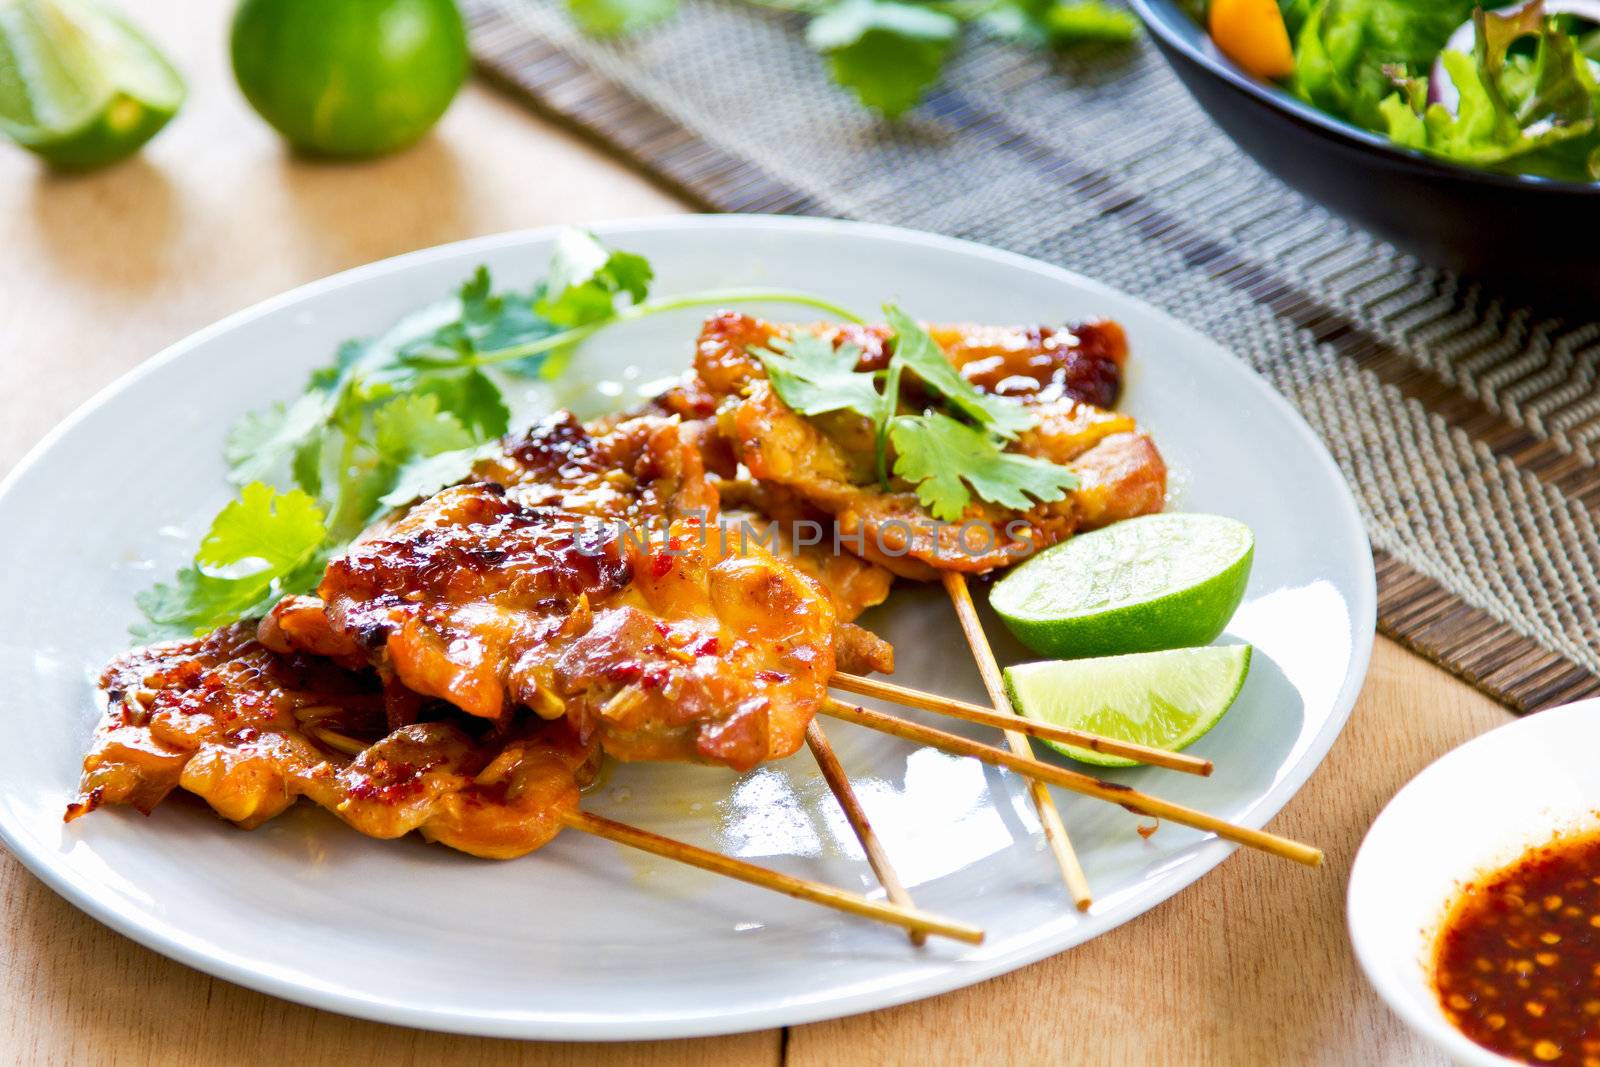 Grilled chicken with Thai 's chili sauce and salad